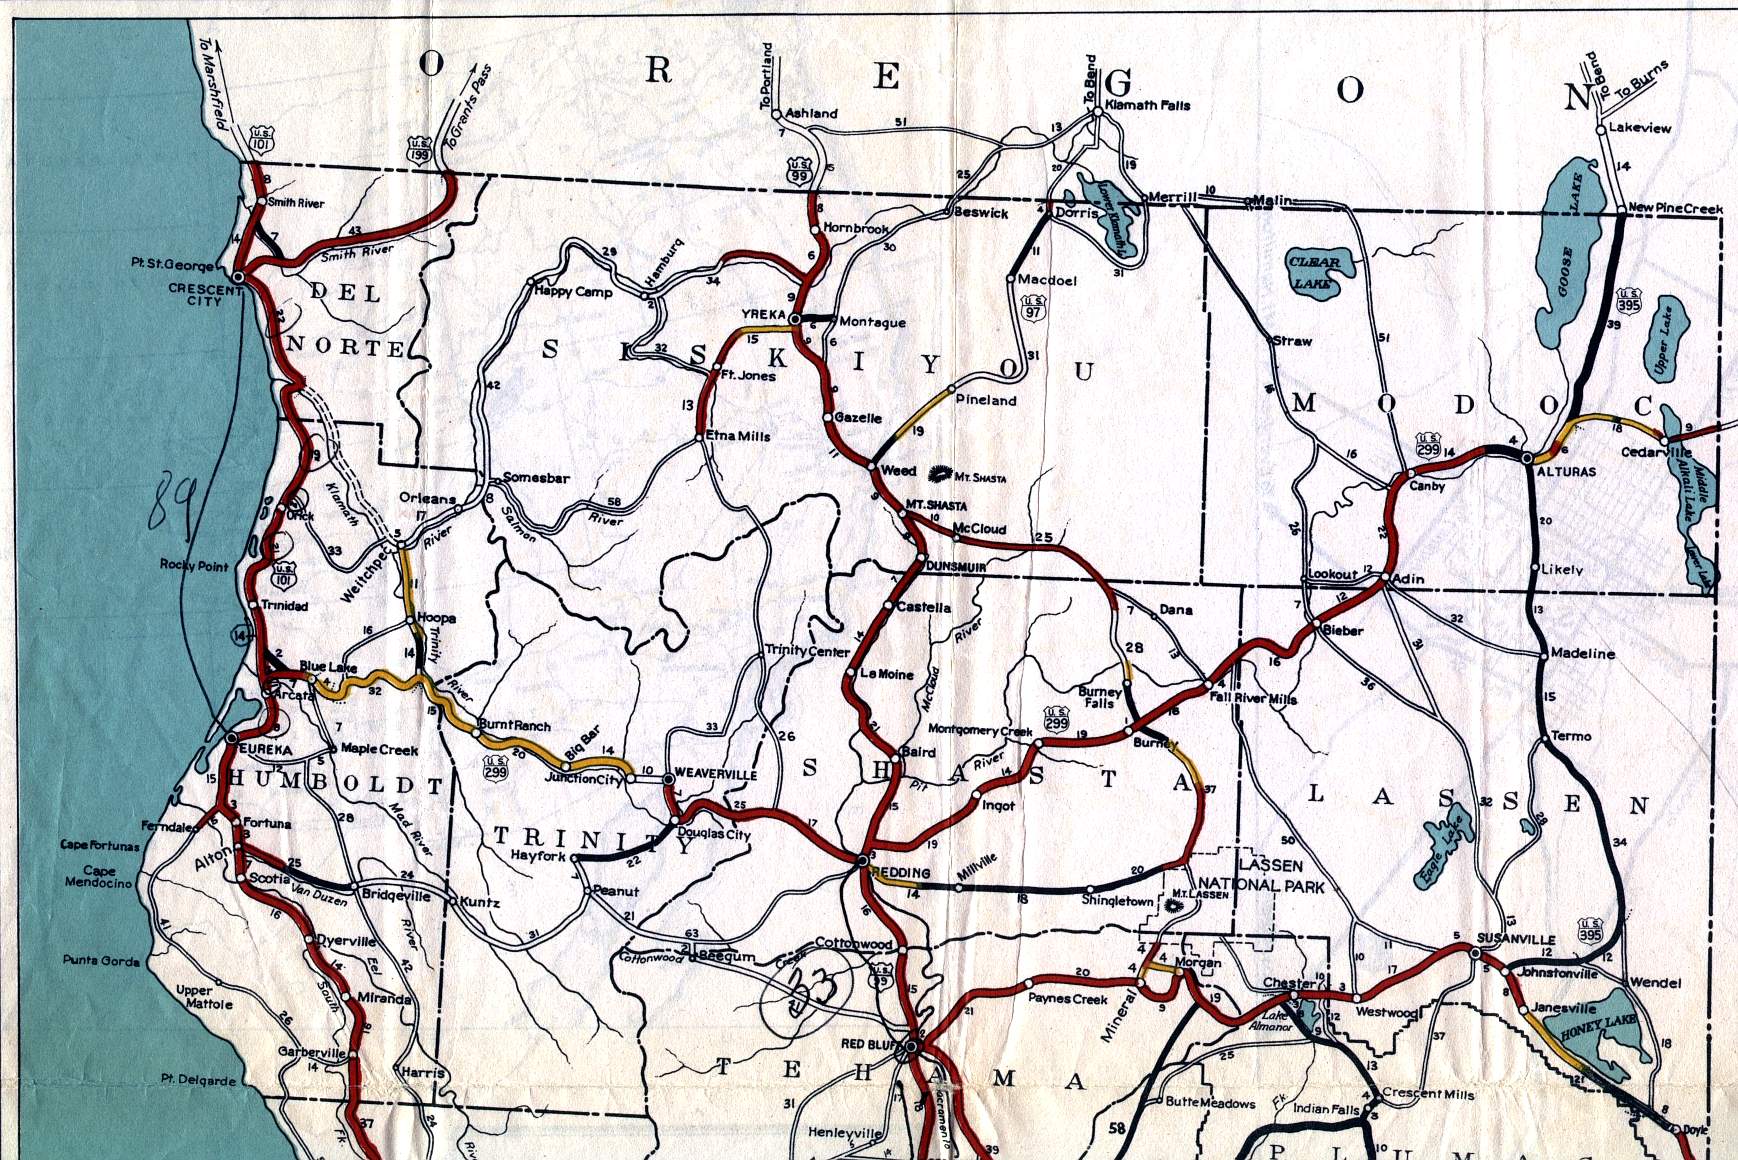 The northernmost portion of California on the 1936 California official highway map